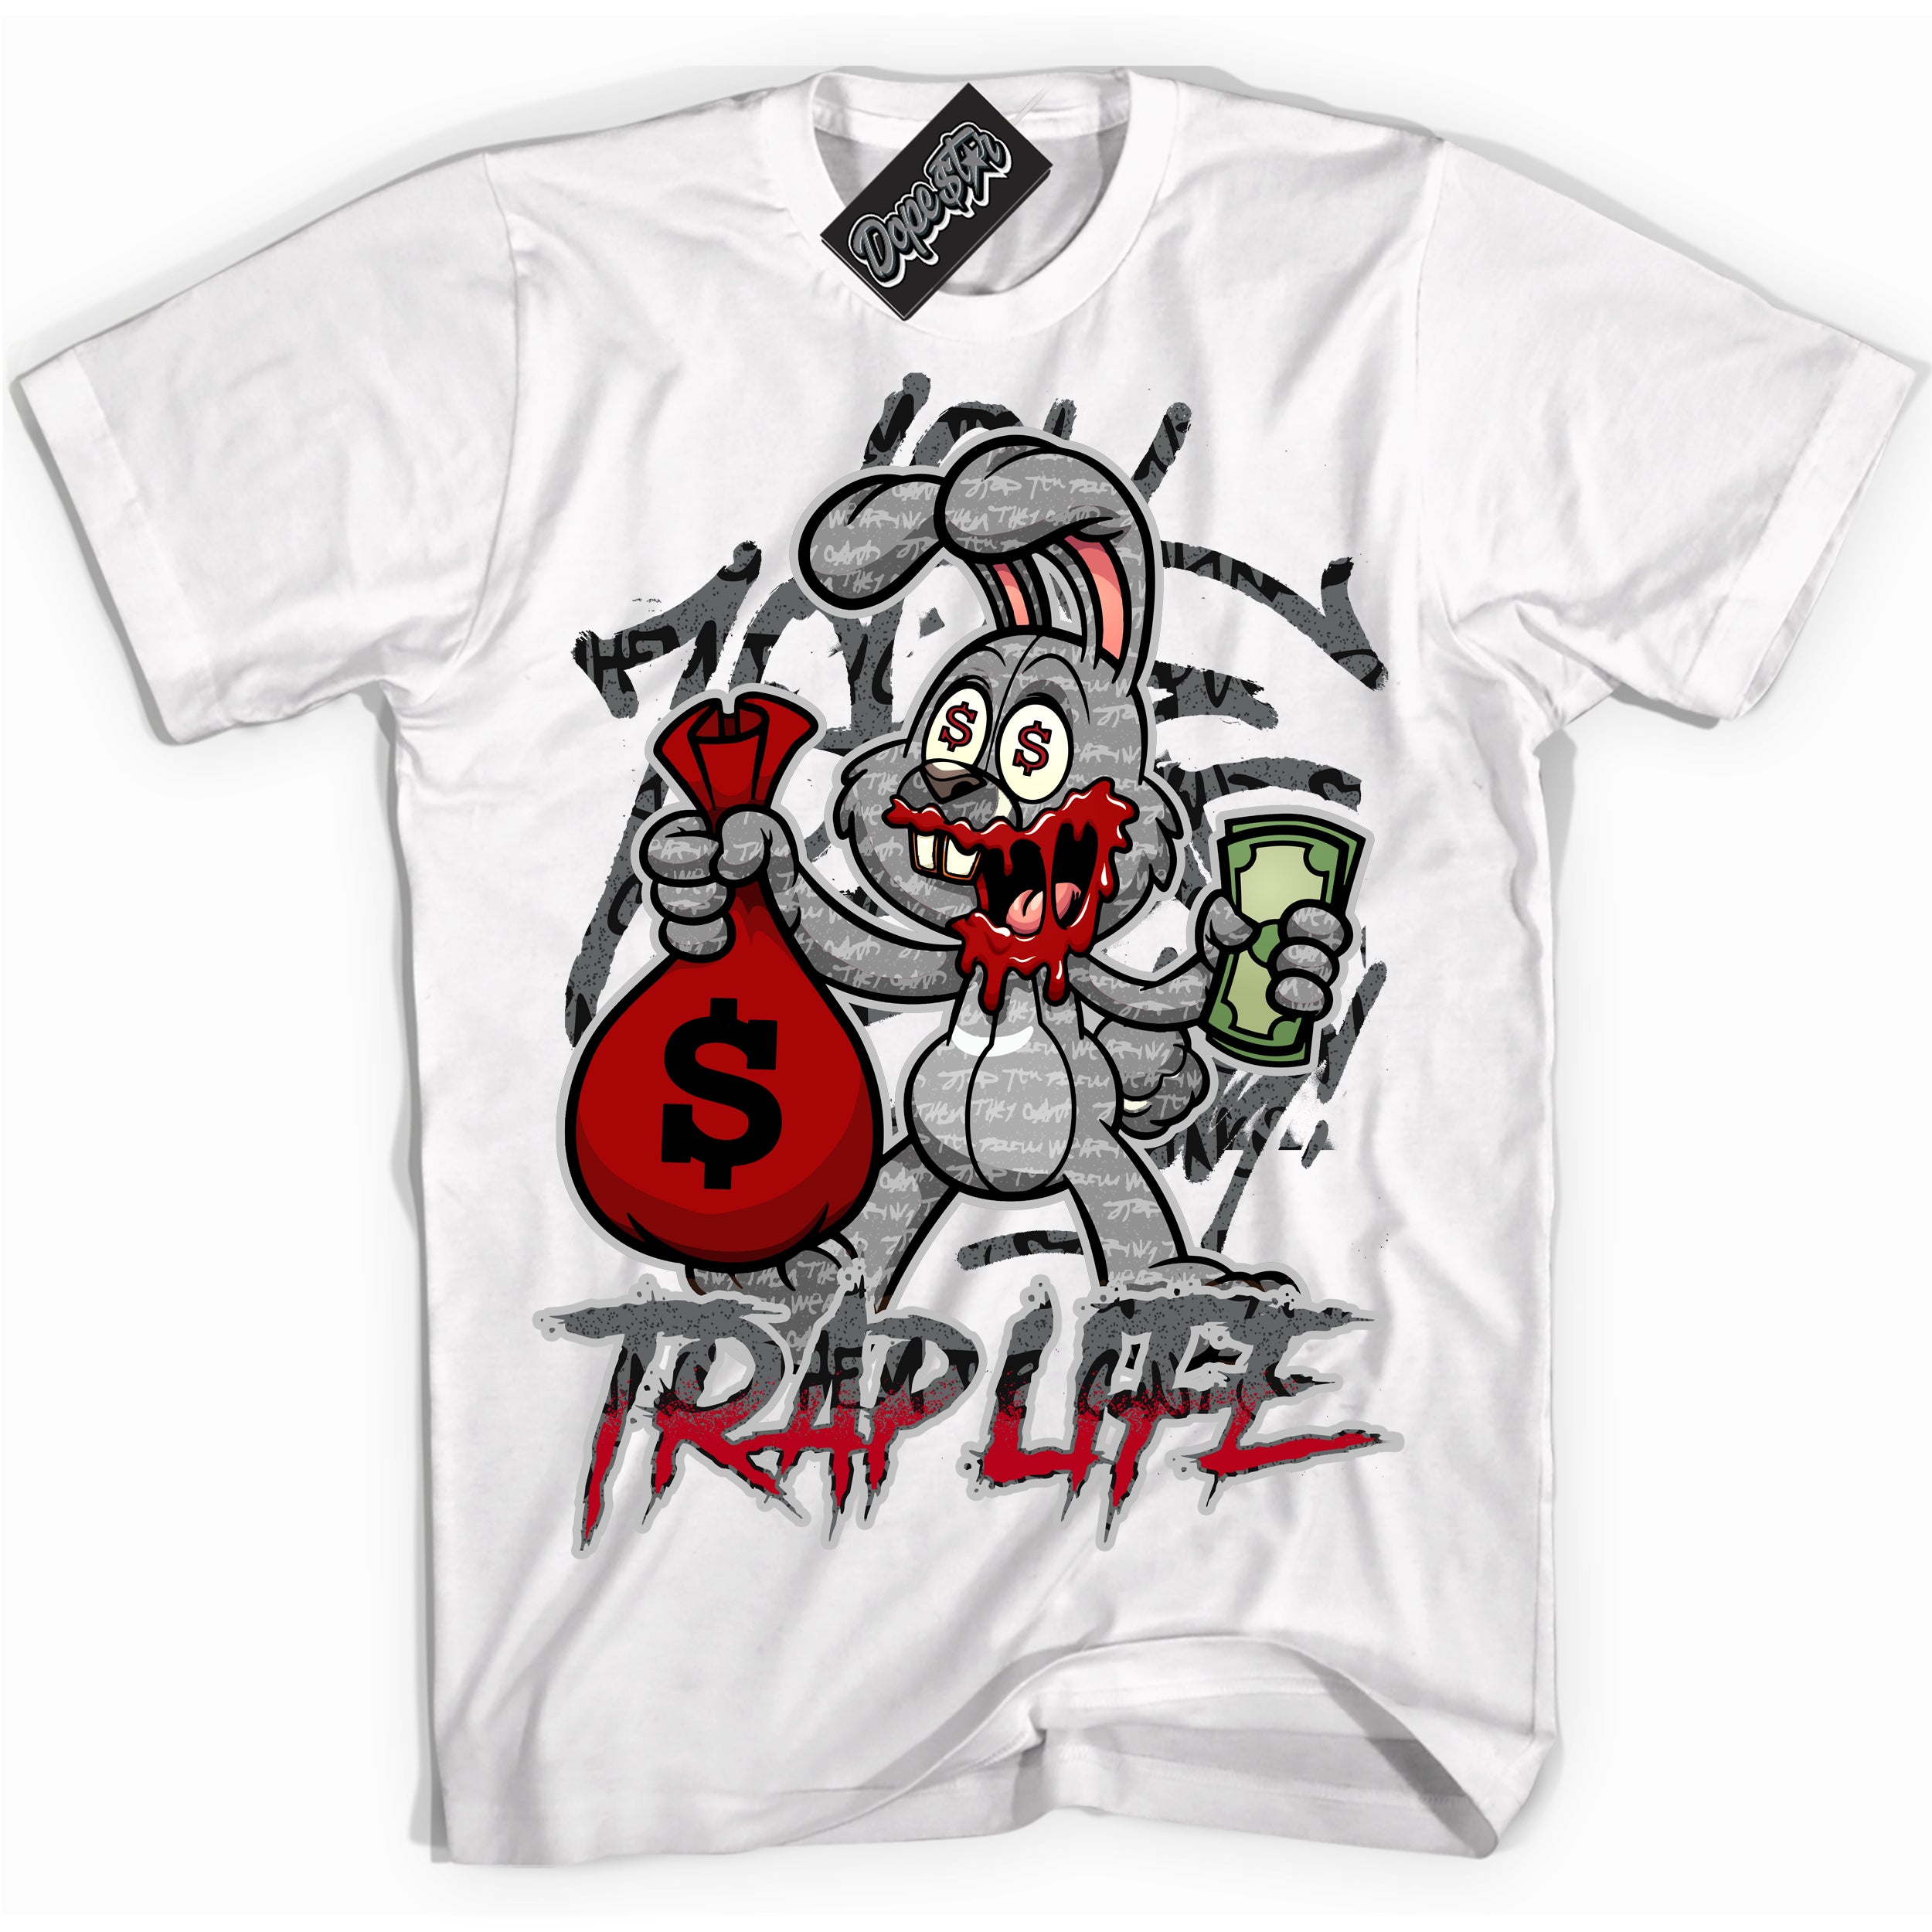 Cool White Shirt with “ Trap Rabbit ” design that perfectly matches Rebellionaire 1s Sneakers.